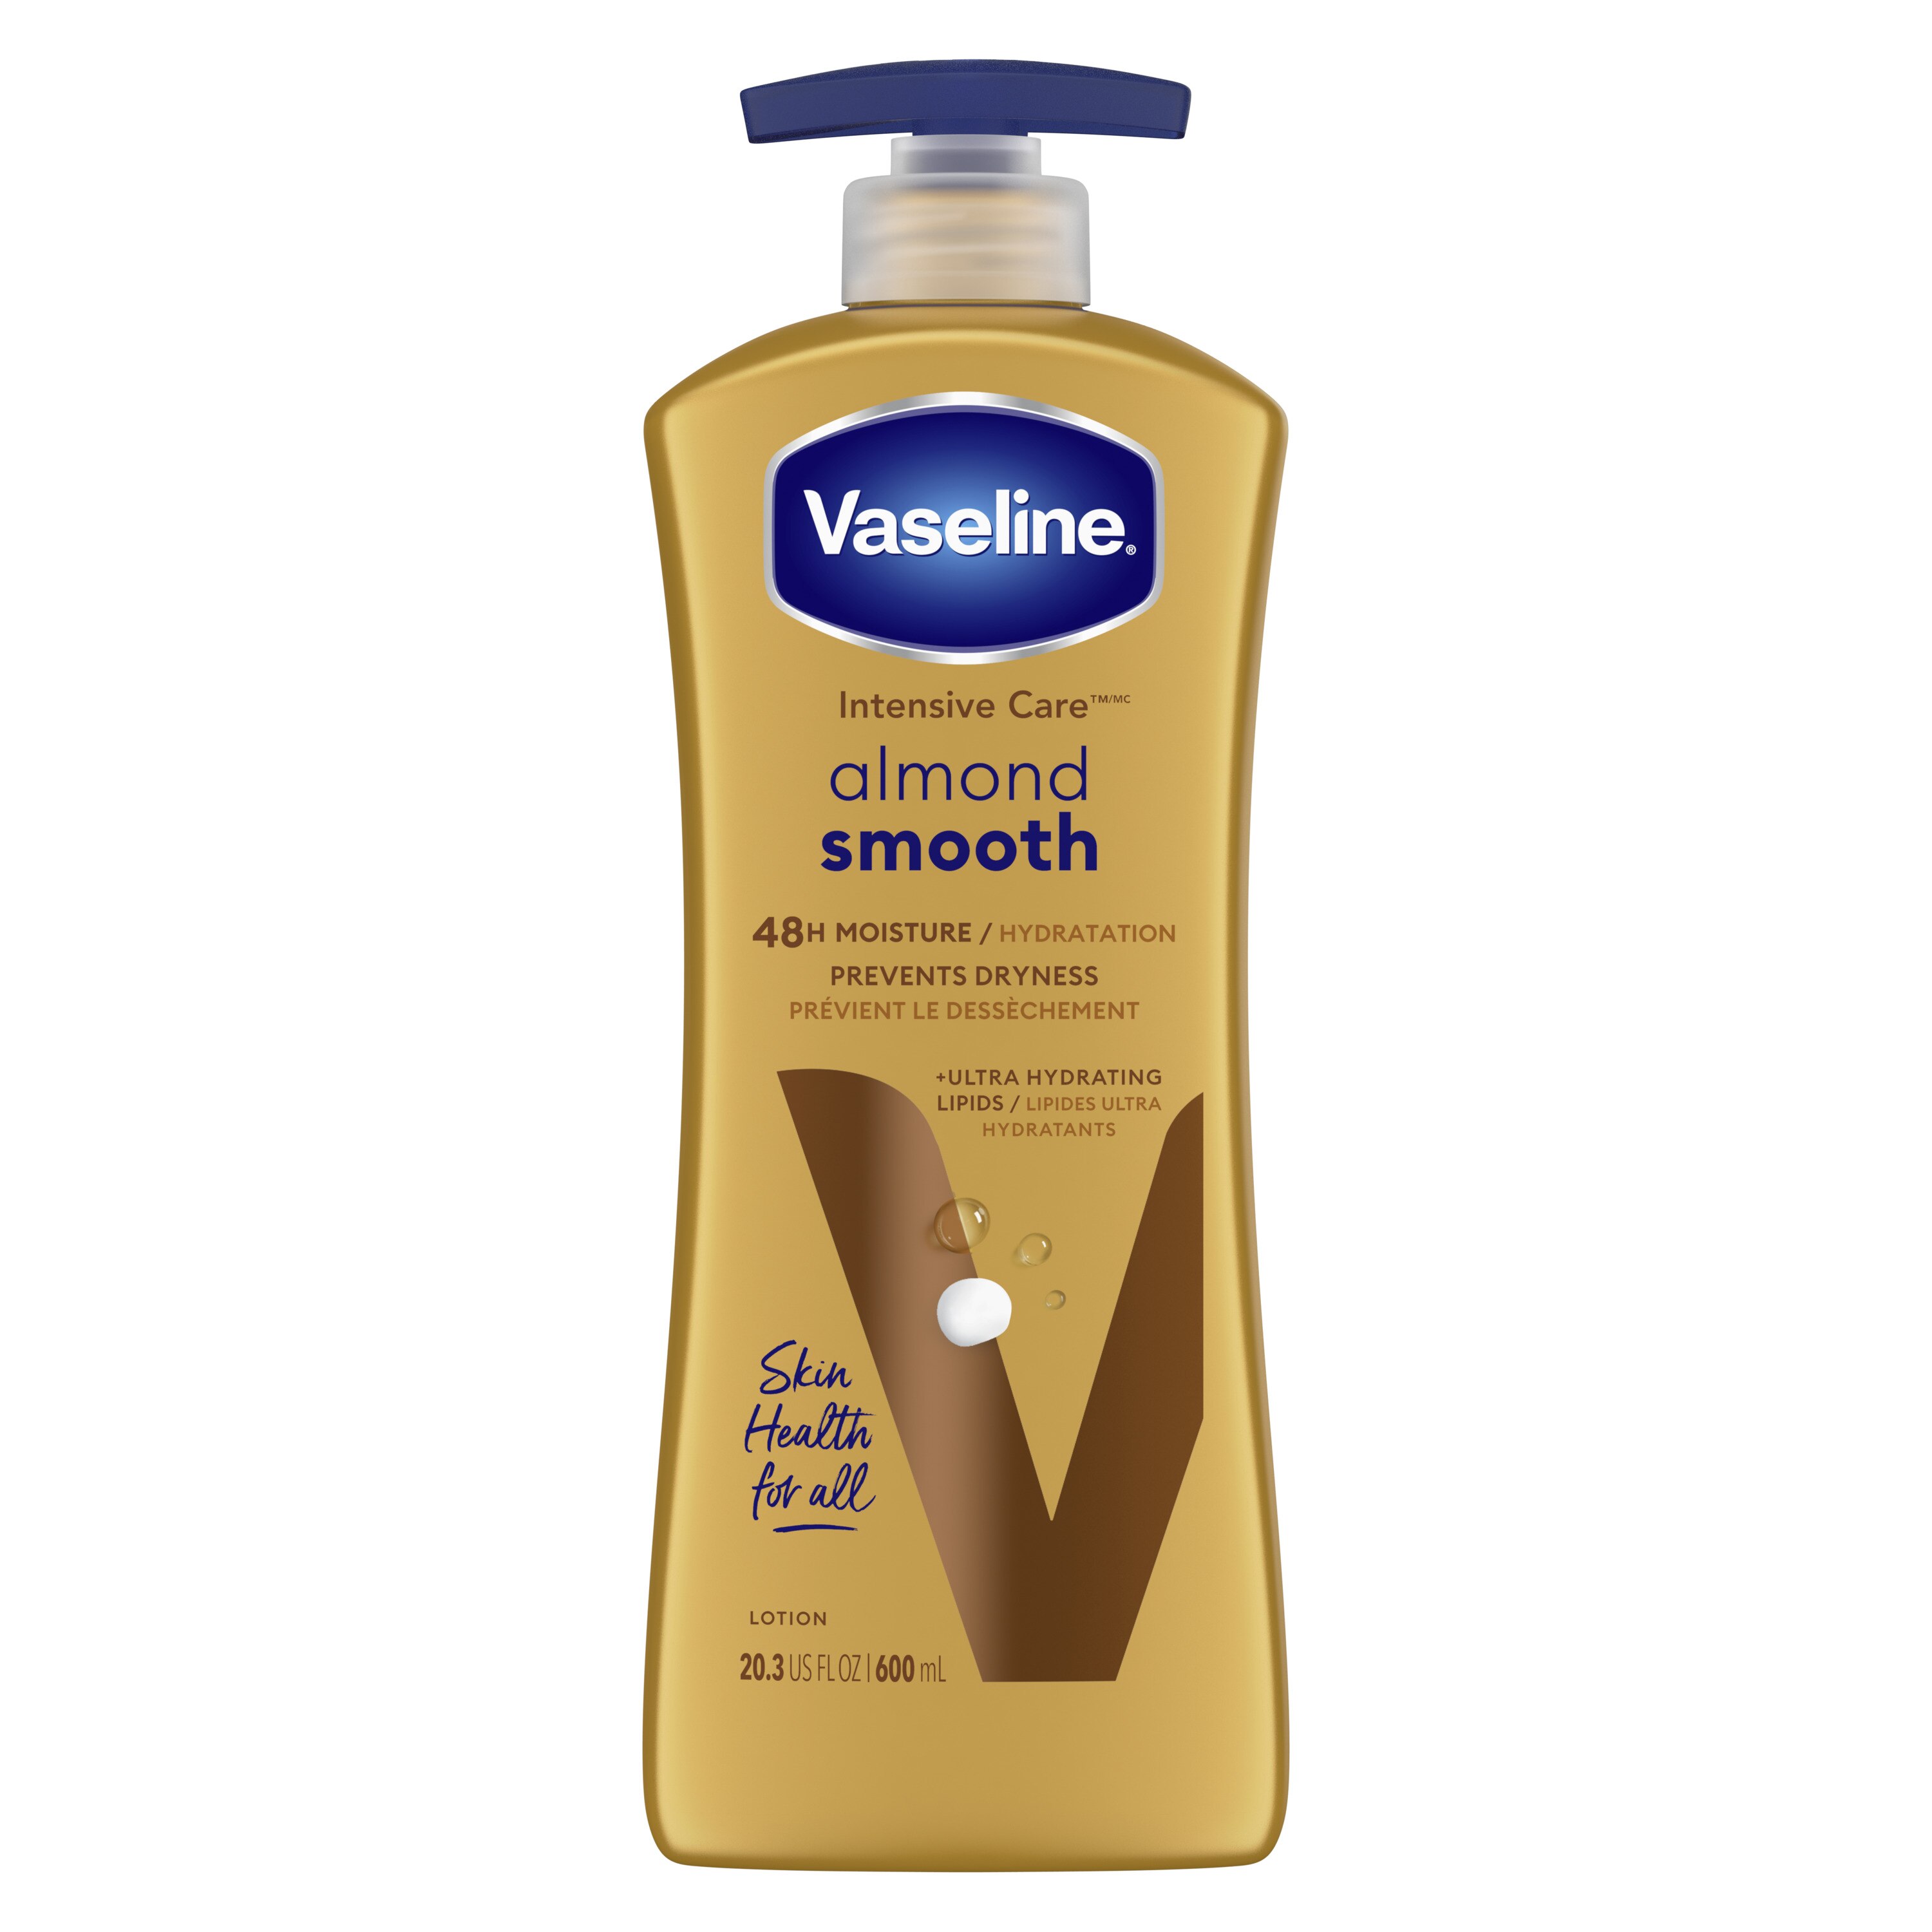 Vaseline Body Lotion Almond Smooth Intensive Care for Dry Skin, 20.3 OZ